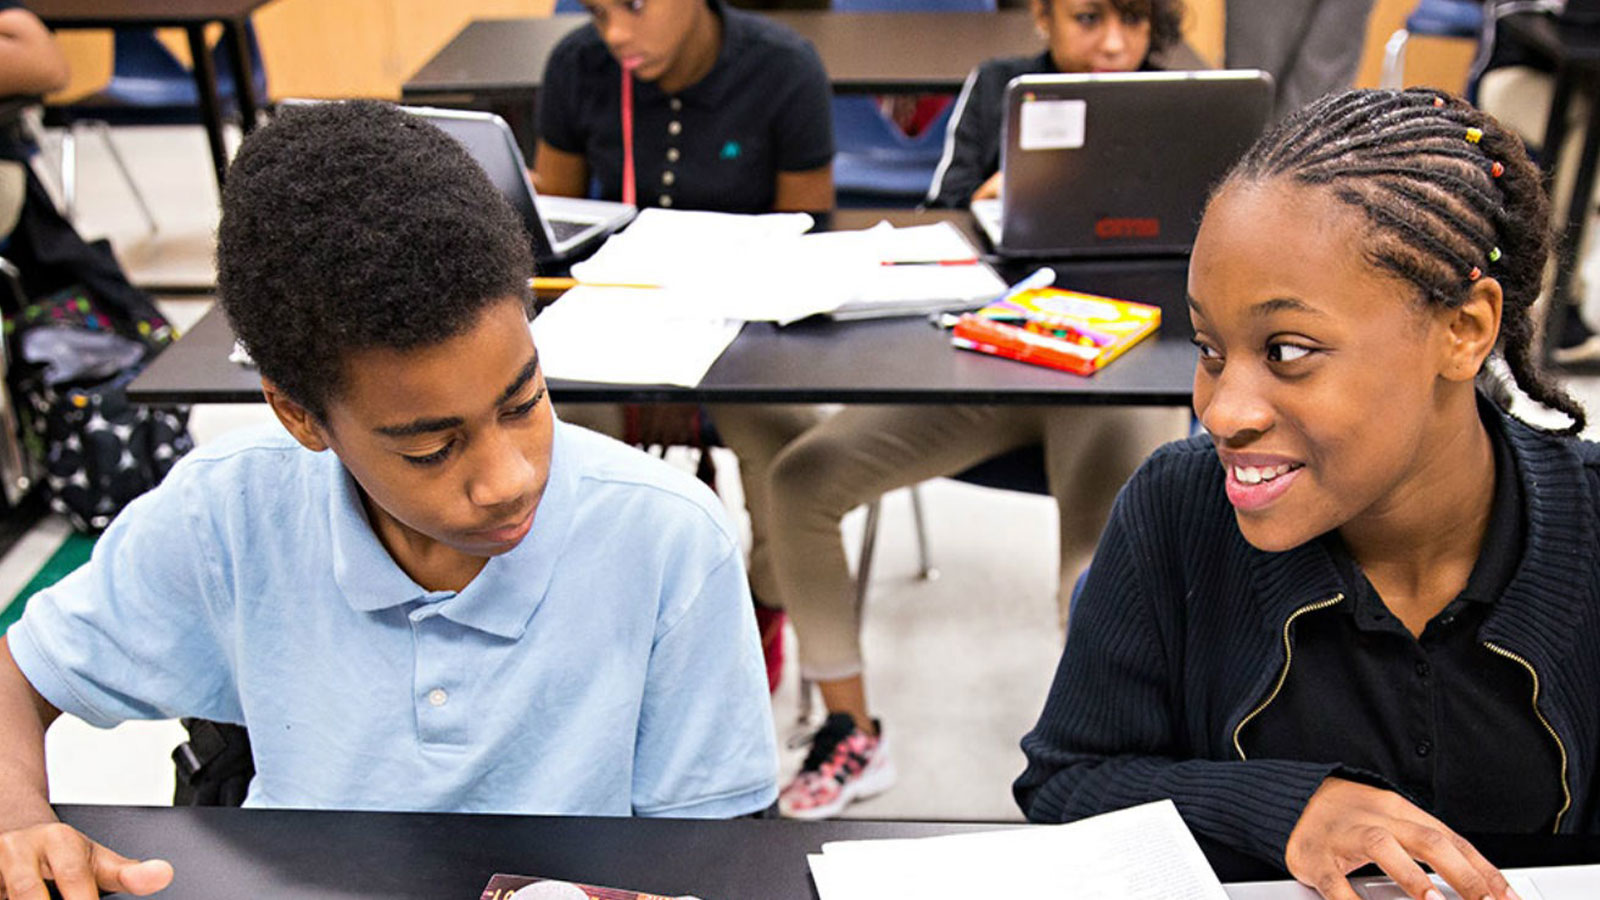 A smiling girl looks at a boy who is reviewing a paper on a school desk in an education setting that uses data